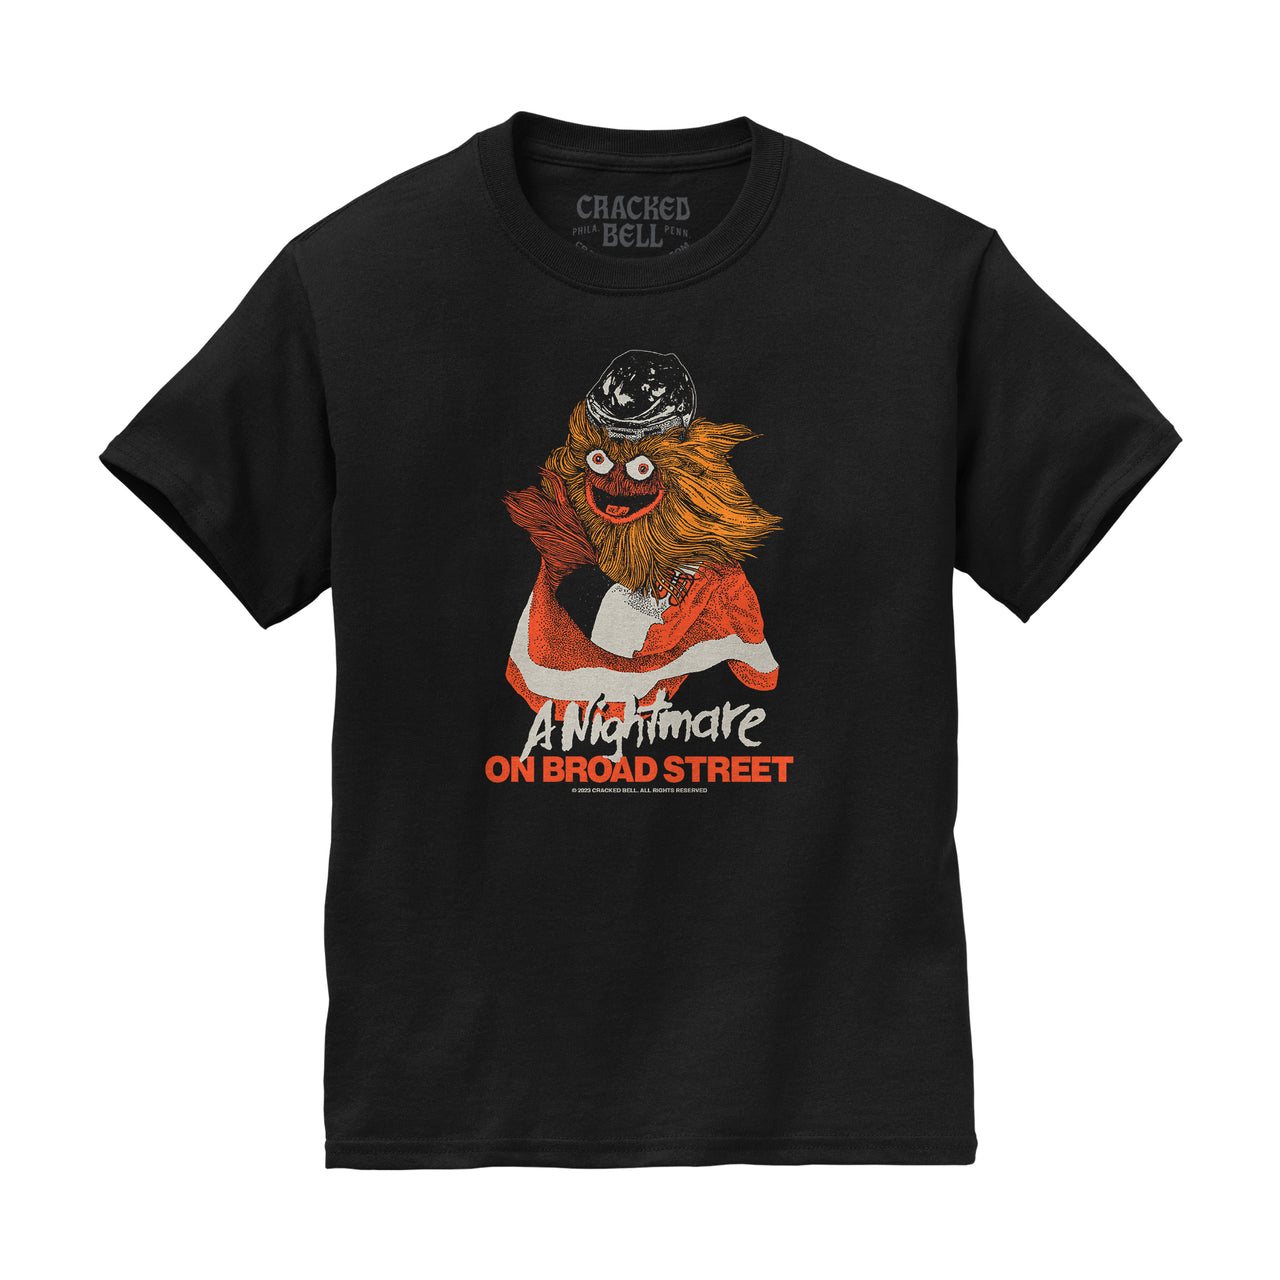 "A Nightmare On Broad Street" Youth & Toddler Shirt